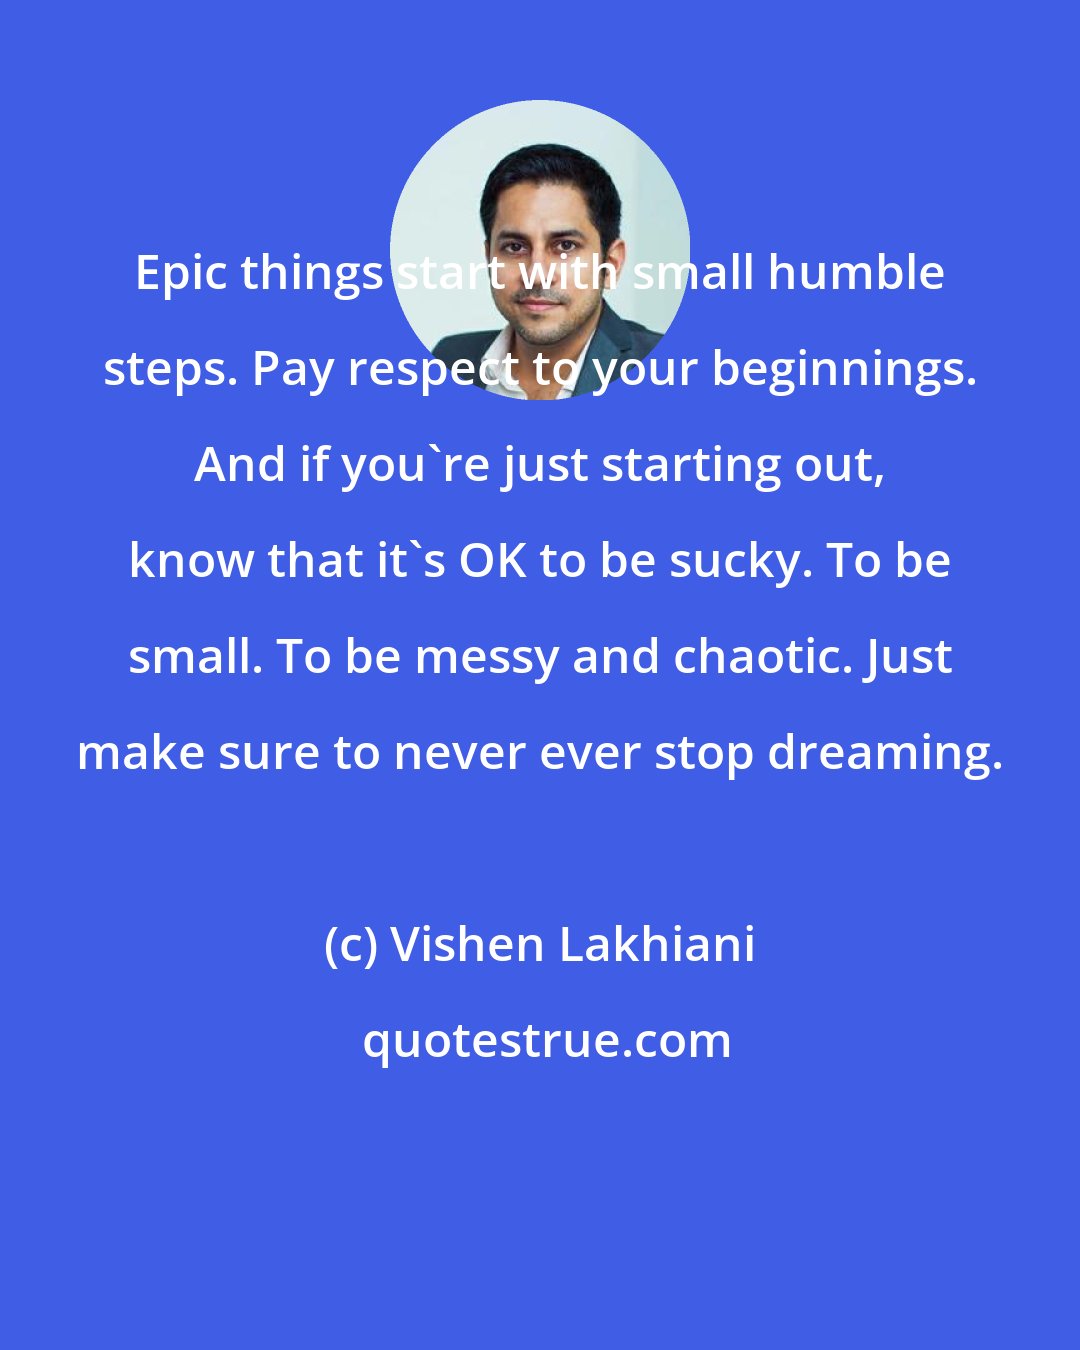 Vishen Lakhiani: Epic things start with small humble steps. Pay respect to your beginnings. And if you're just starting out, know that it's OK to be sucky. To be small. To be messy and chaotic. Just make sure to never ever stop dreaming.